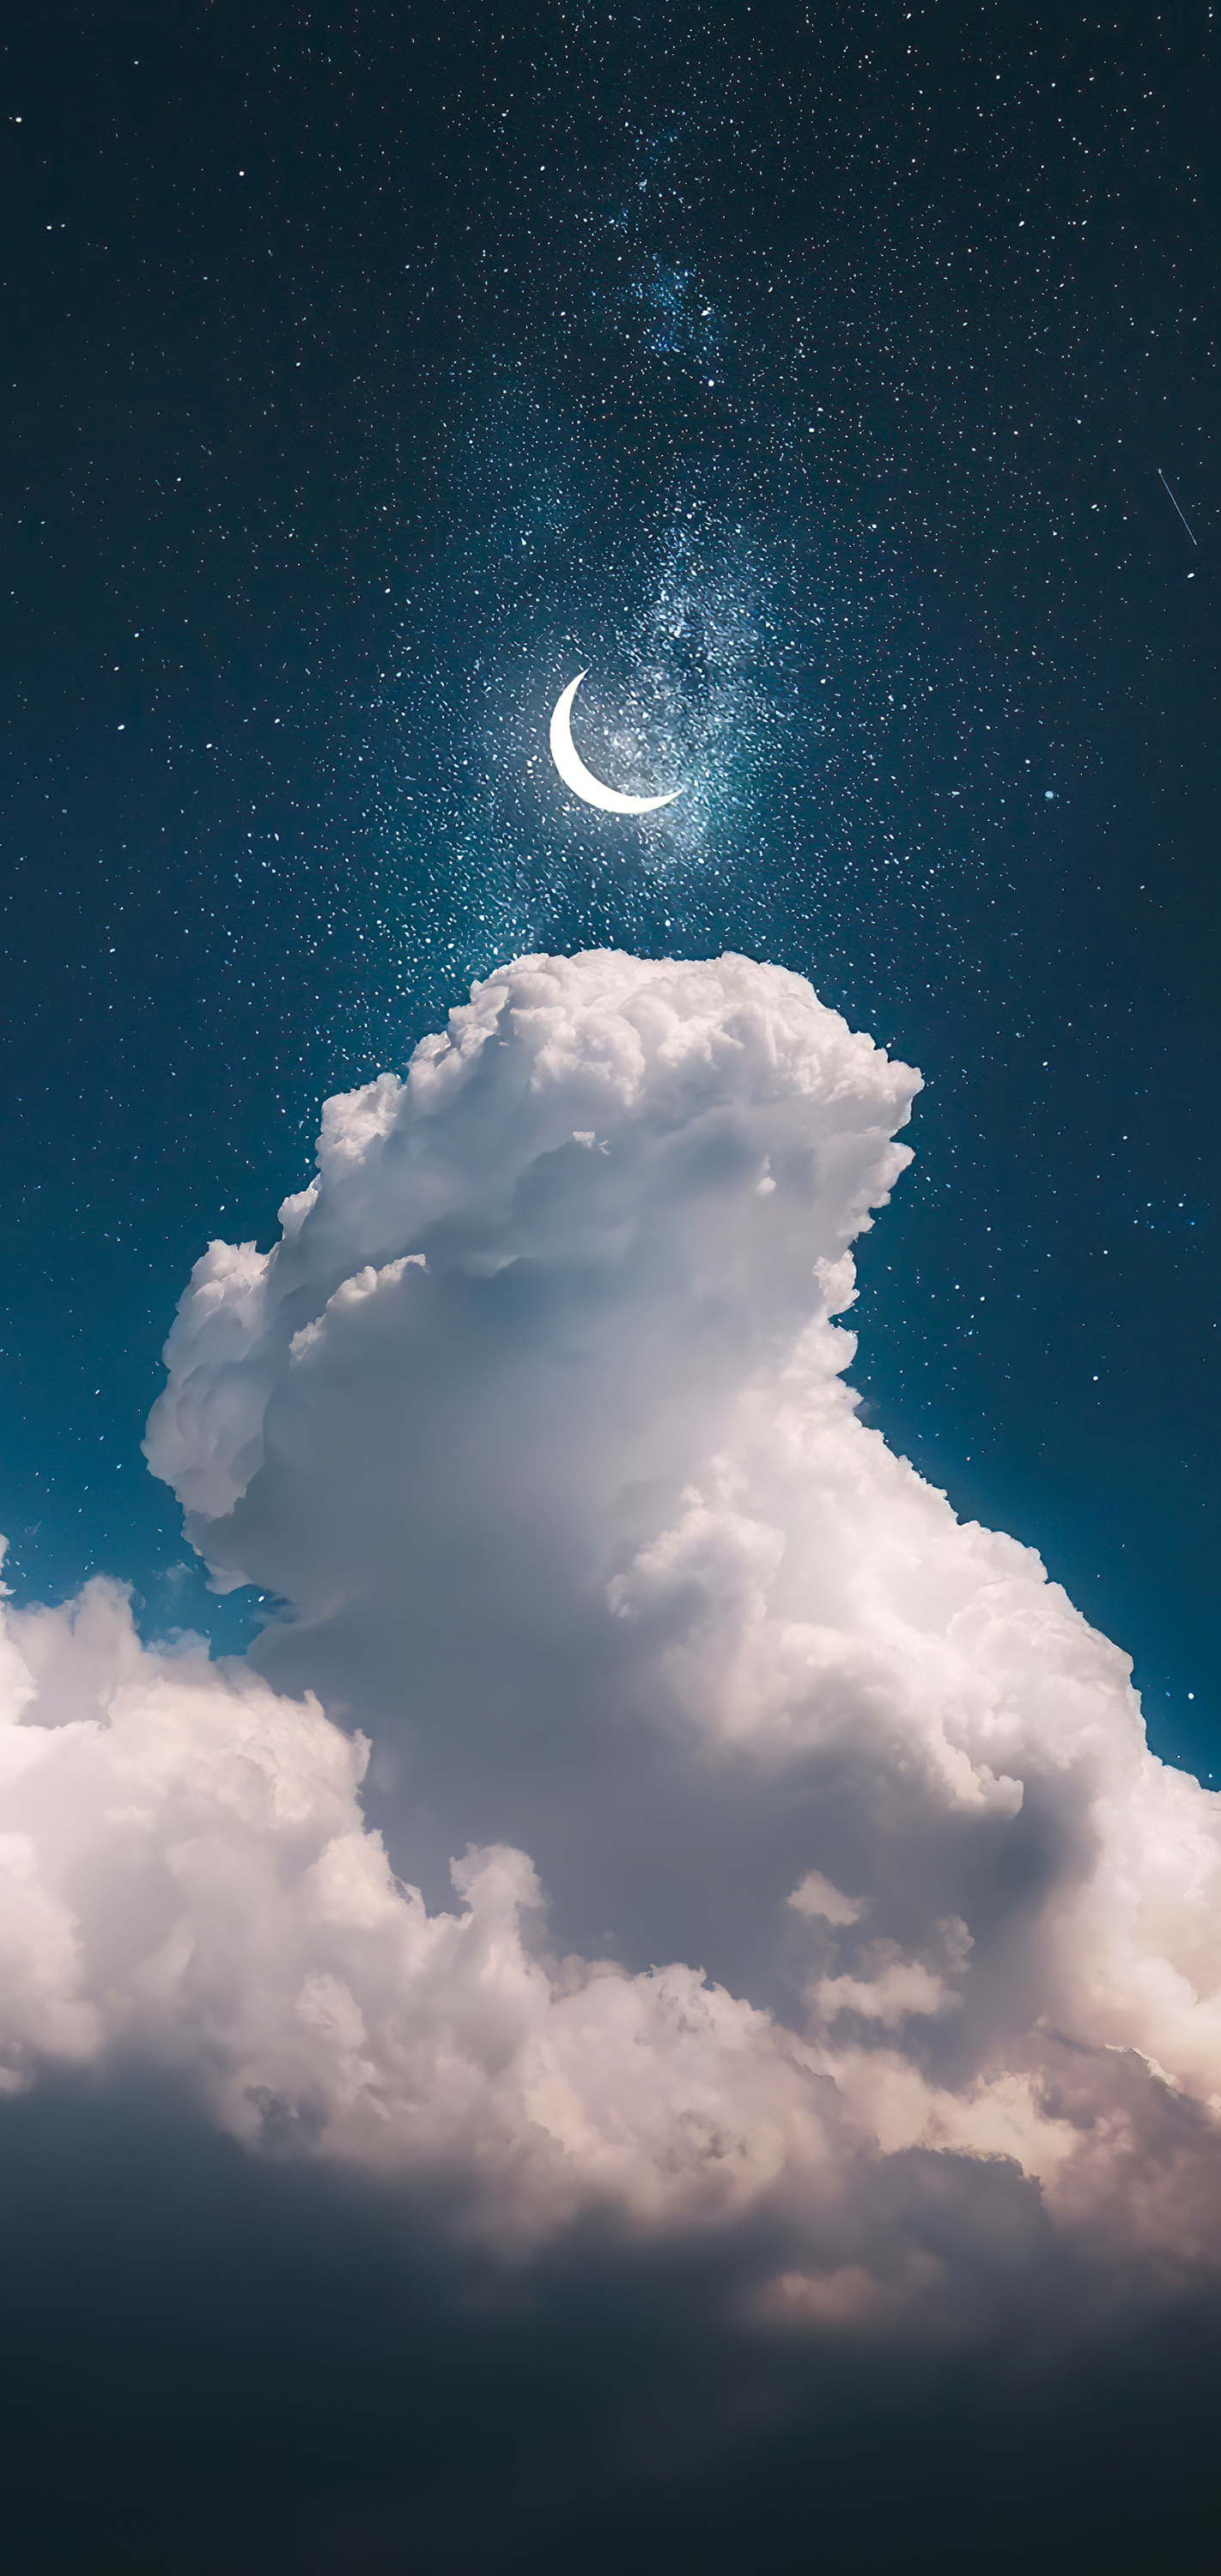 1422x3000 5 beautiful night sky wallpapers for iPhone to download